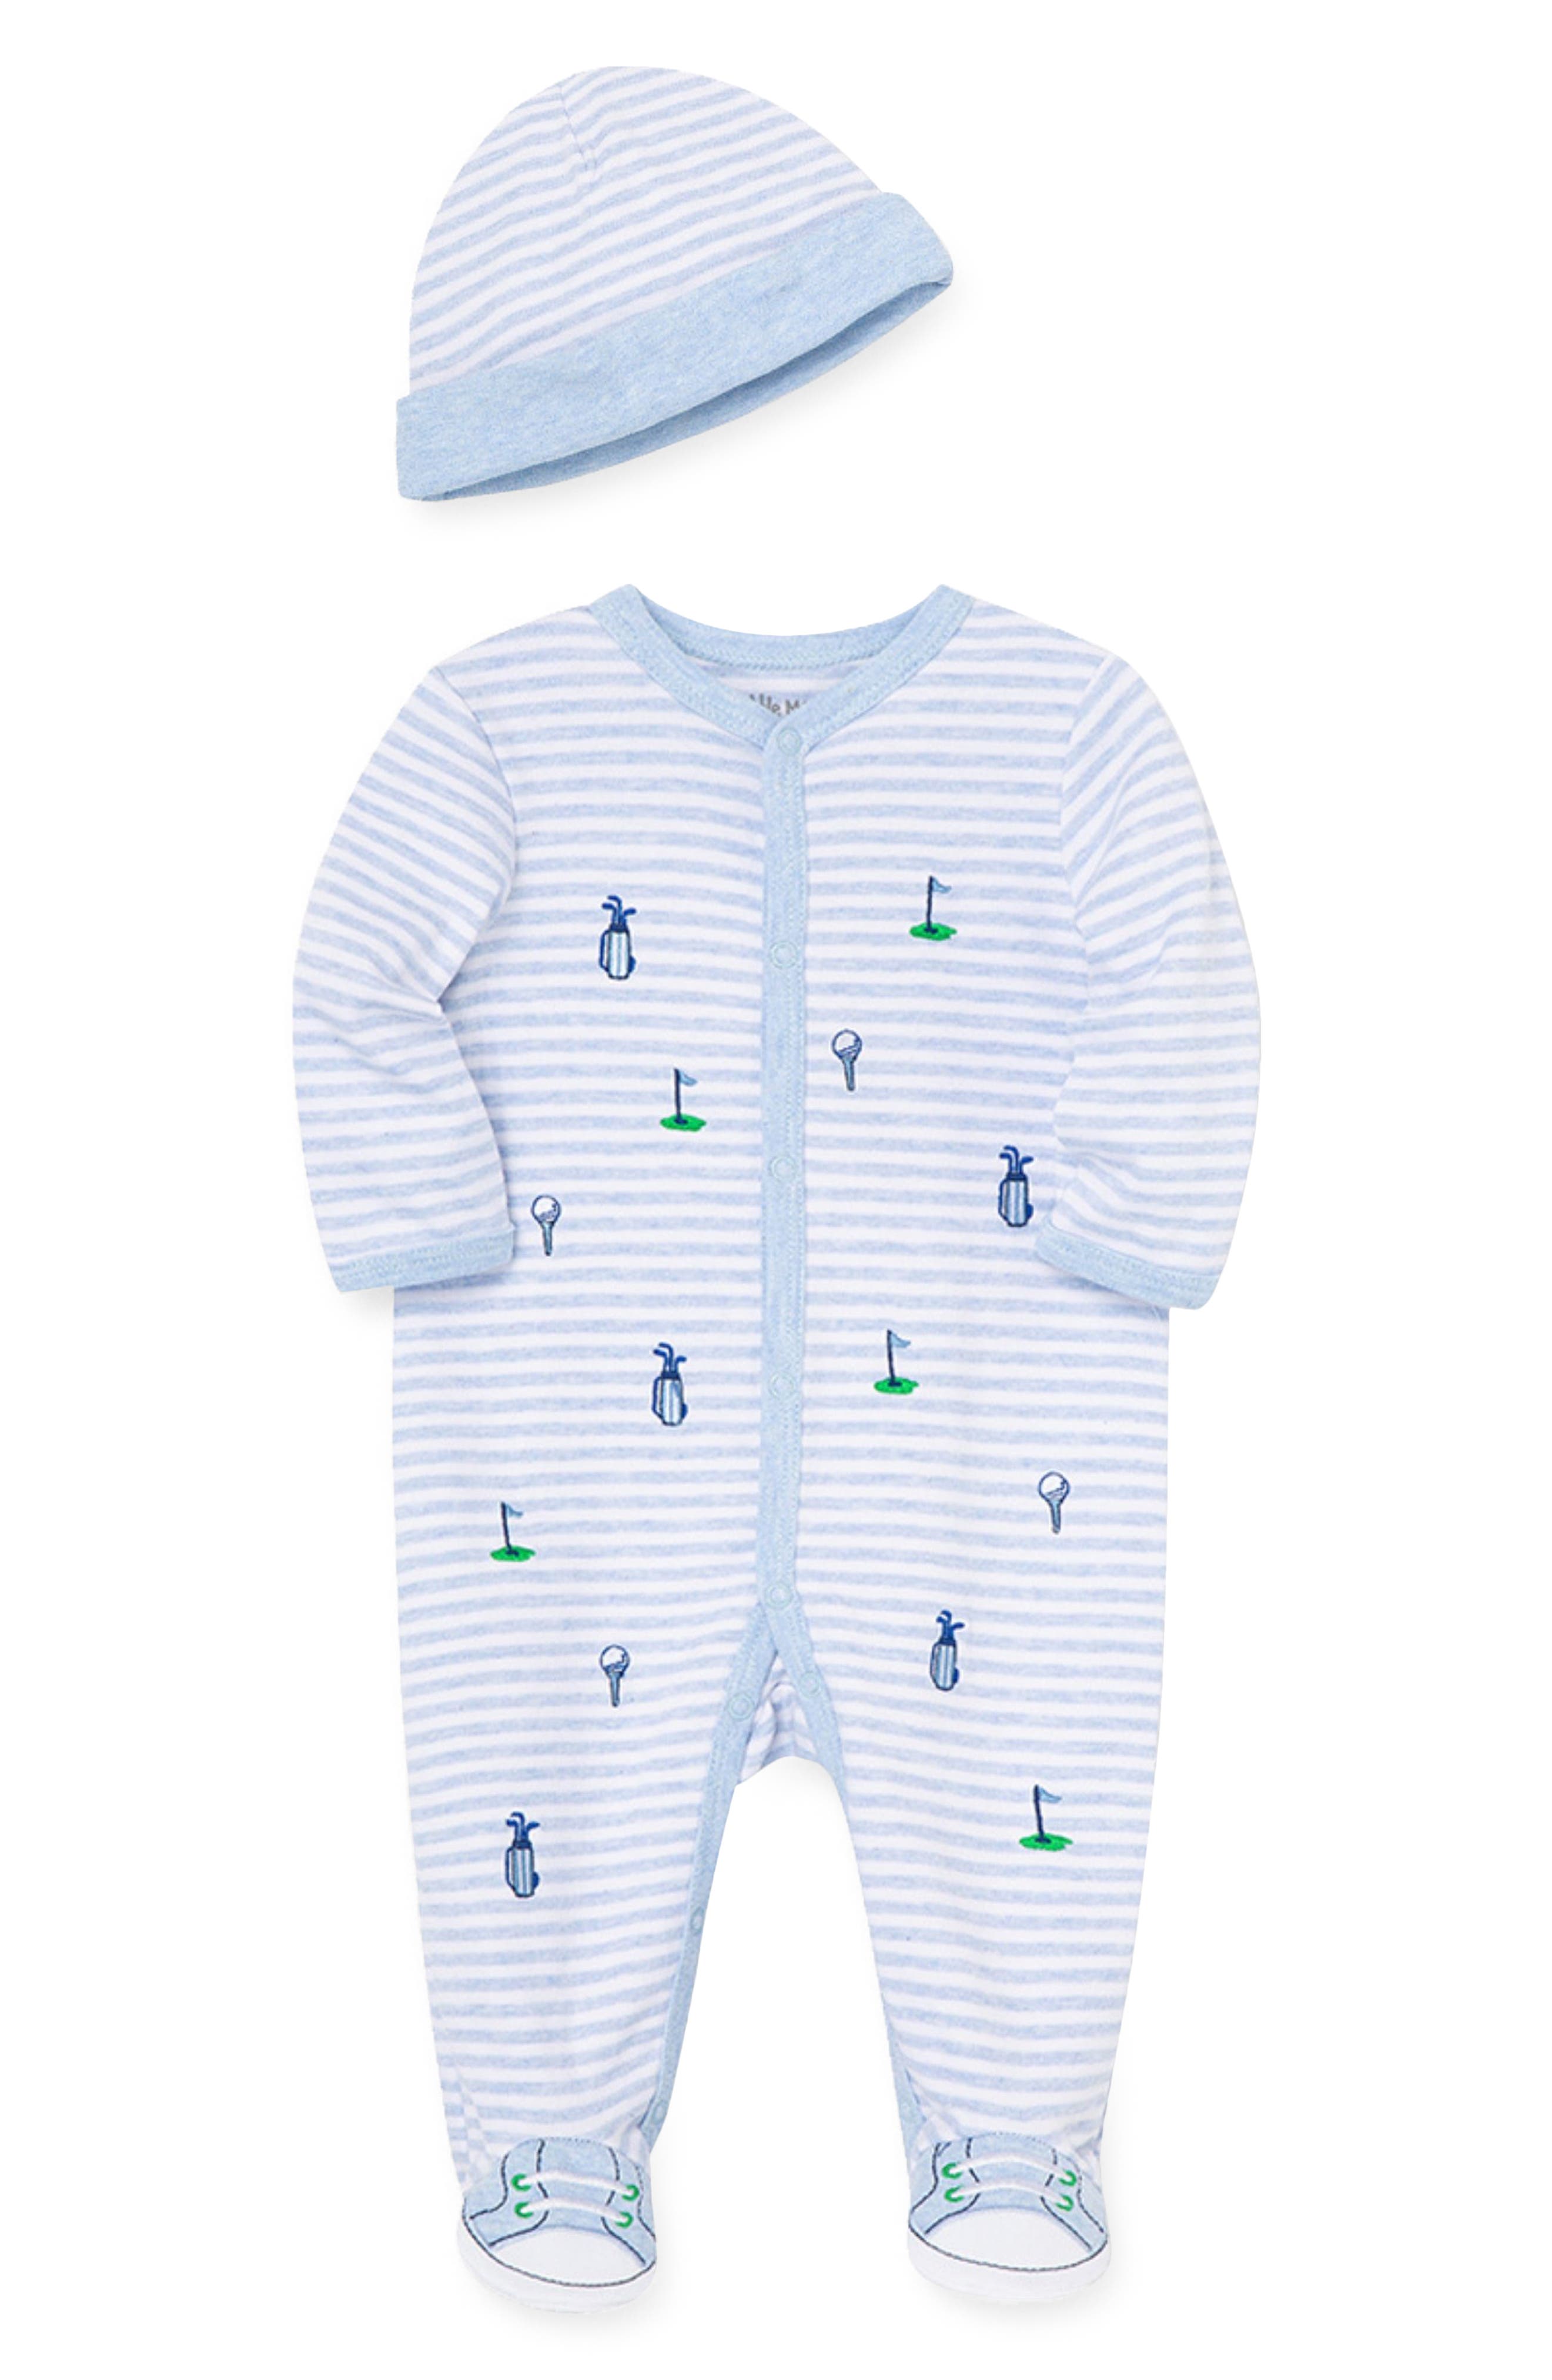 Magnificent Baby Baby Magnetic Embroidered Footie and Hat Set